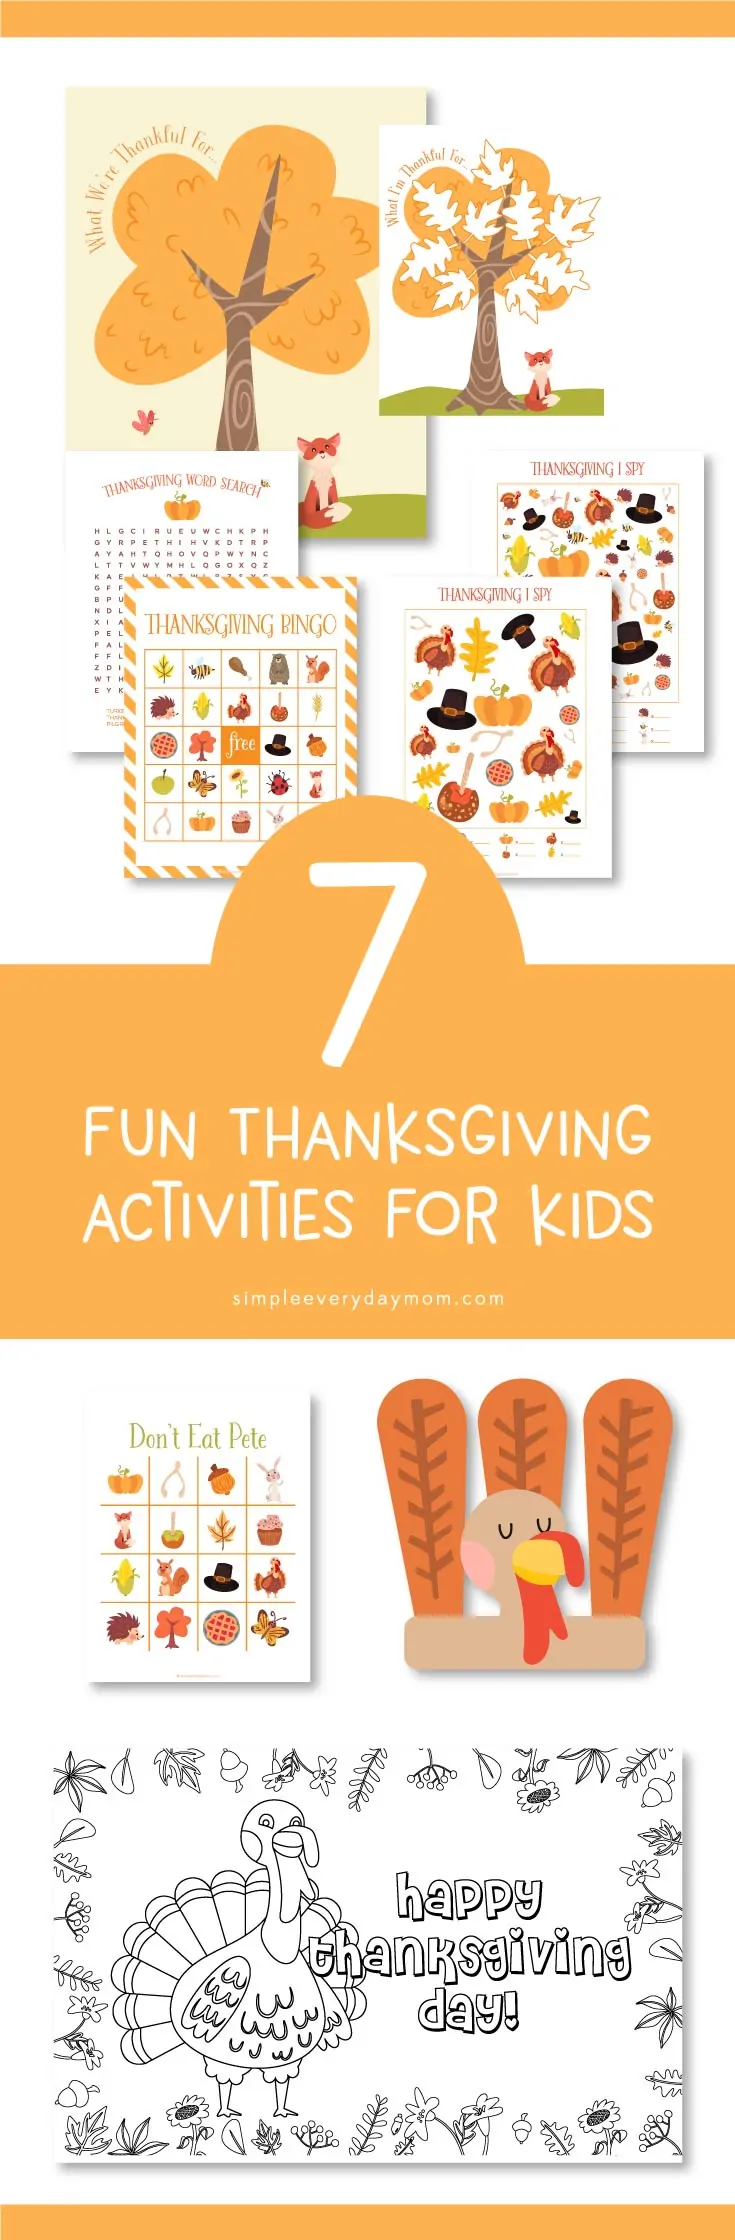 Create some new family traditions and spend quality time together doing these fun Thanksgiving activities for kids. Download the entire printable pack for games, easy crafts, coloring and more! 